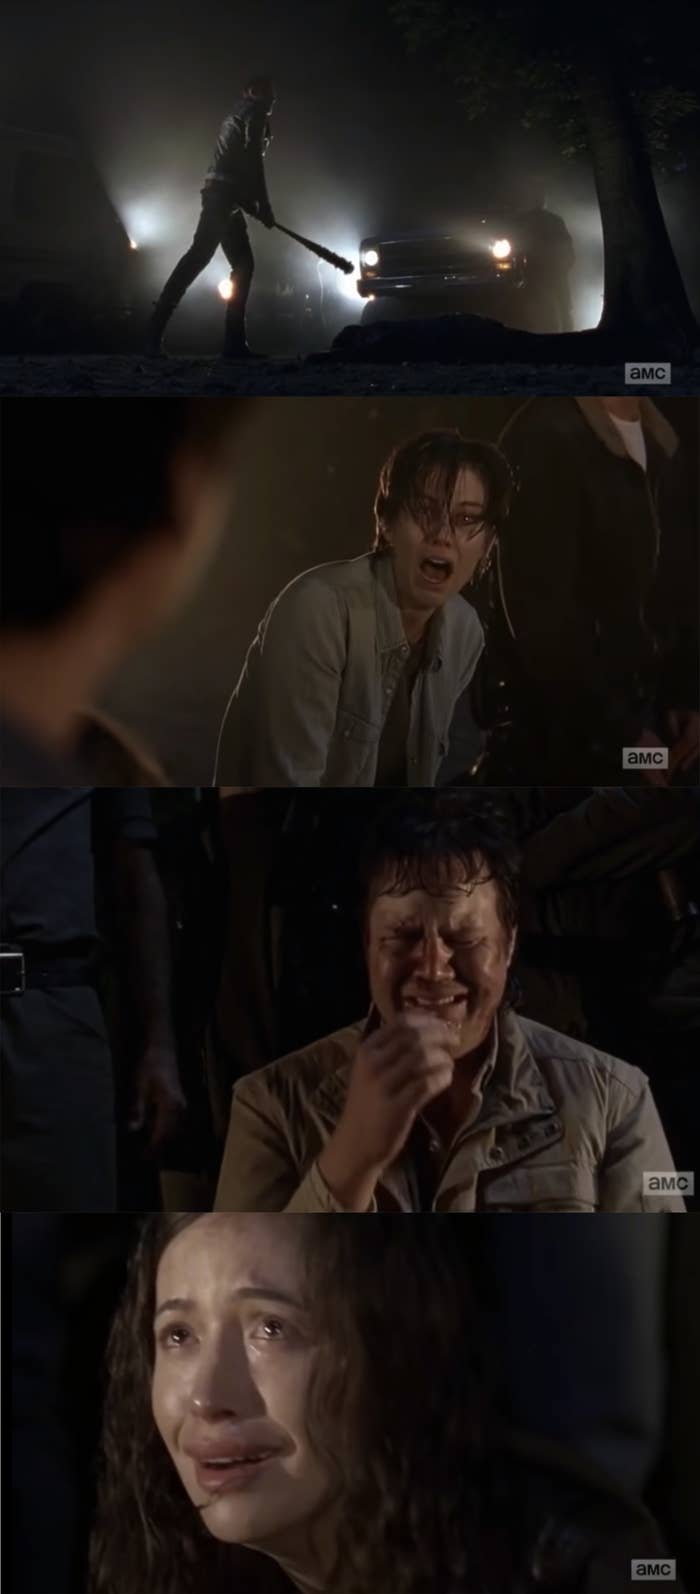 Negan beating Glenn with a bat while his friends and family watch in horror. 